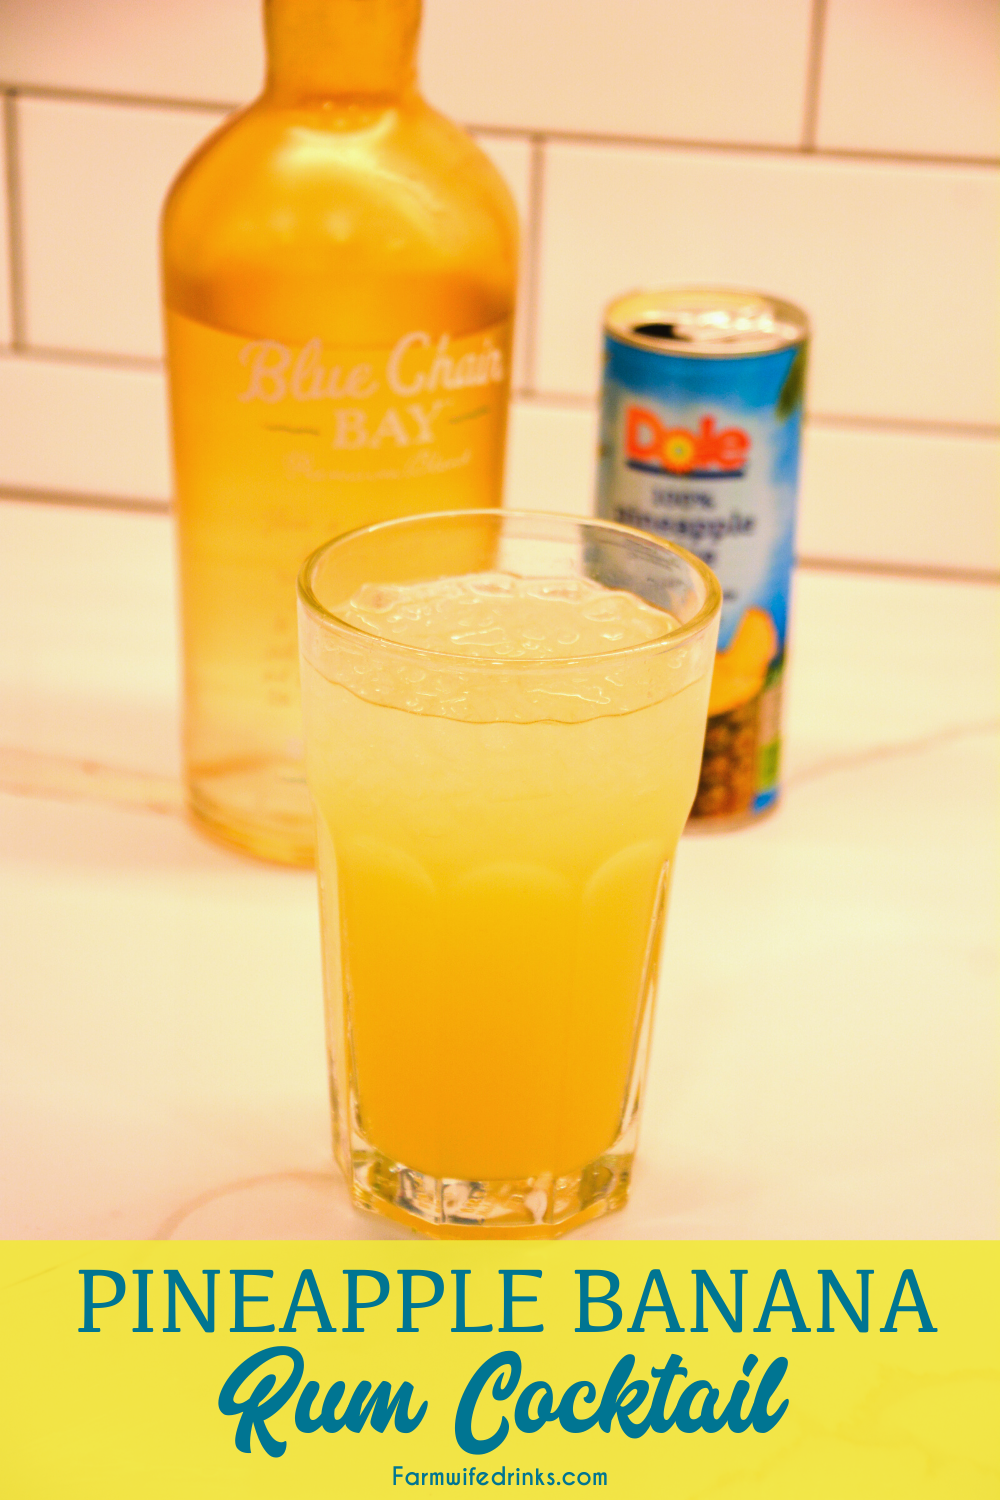 Tropical breeze rum drink is a combination of pineapple juice and banana rum with a splash of lemon-lime soda for the delicious Caribbean pineapple banana rum cocktail.